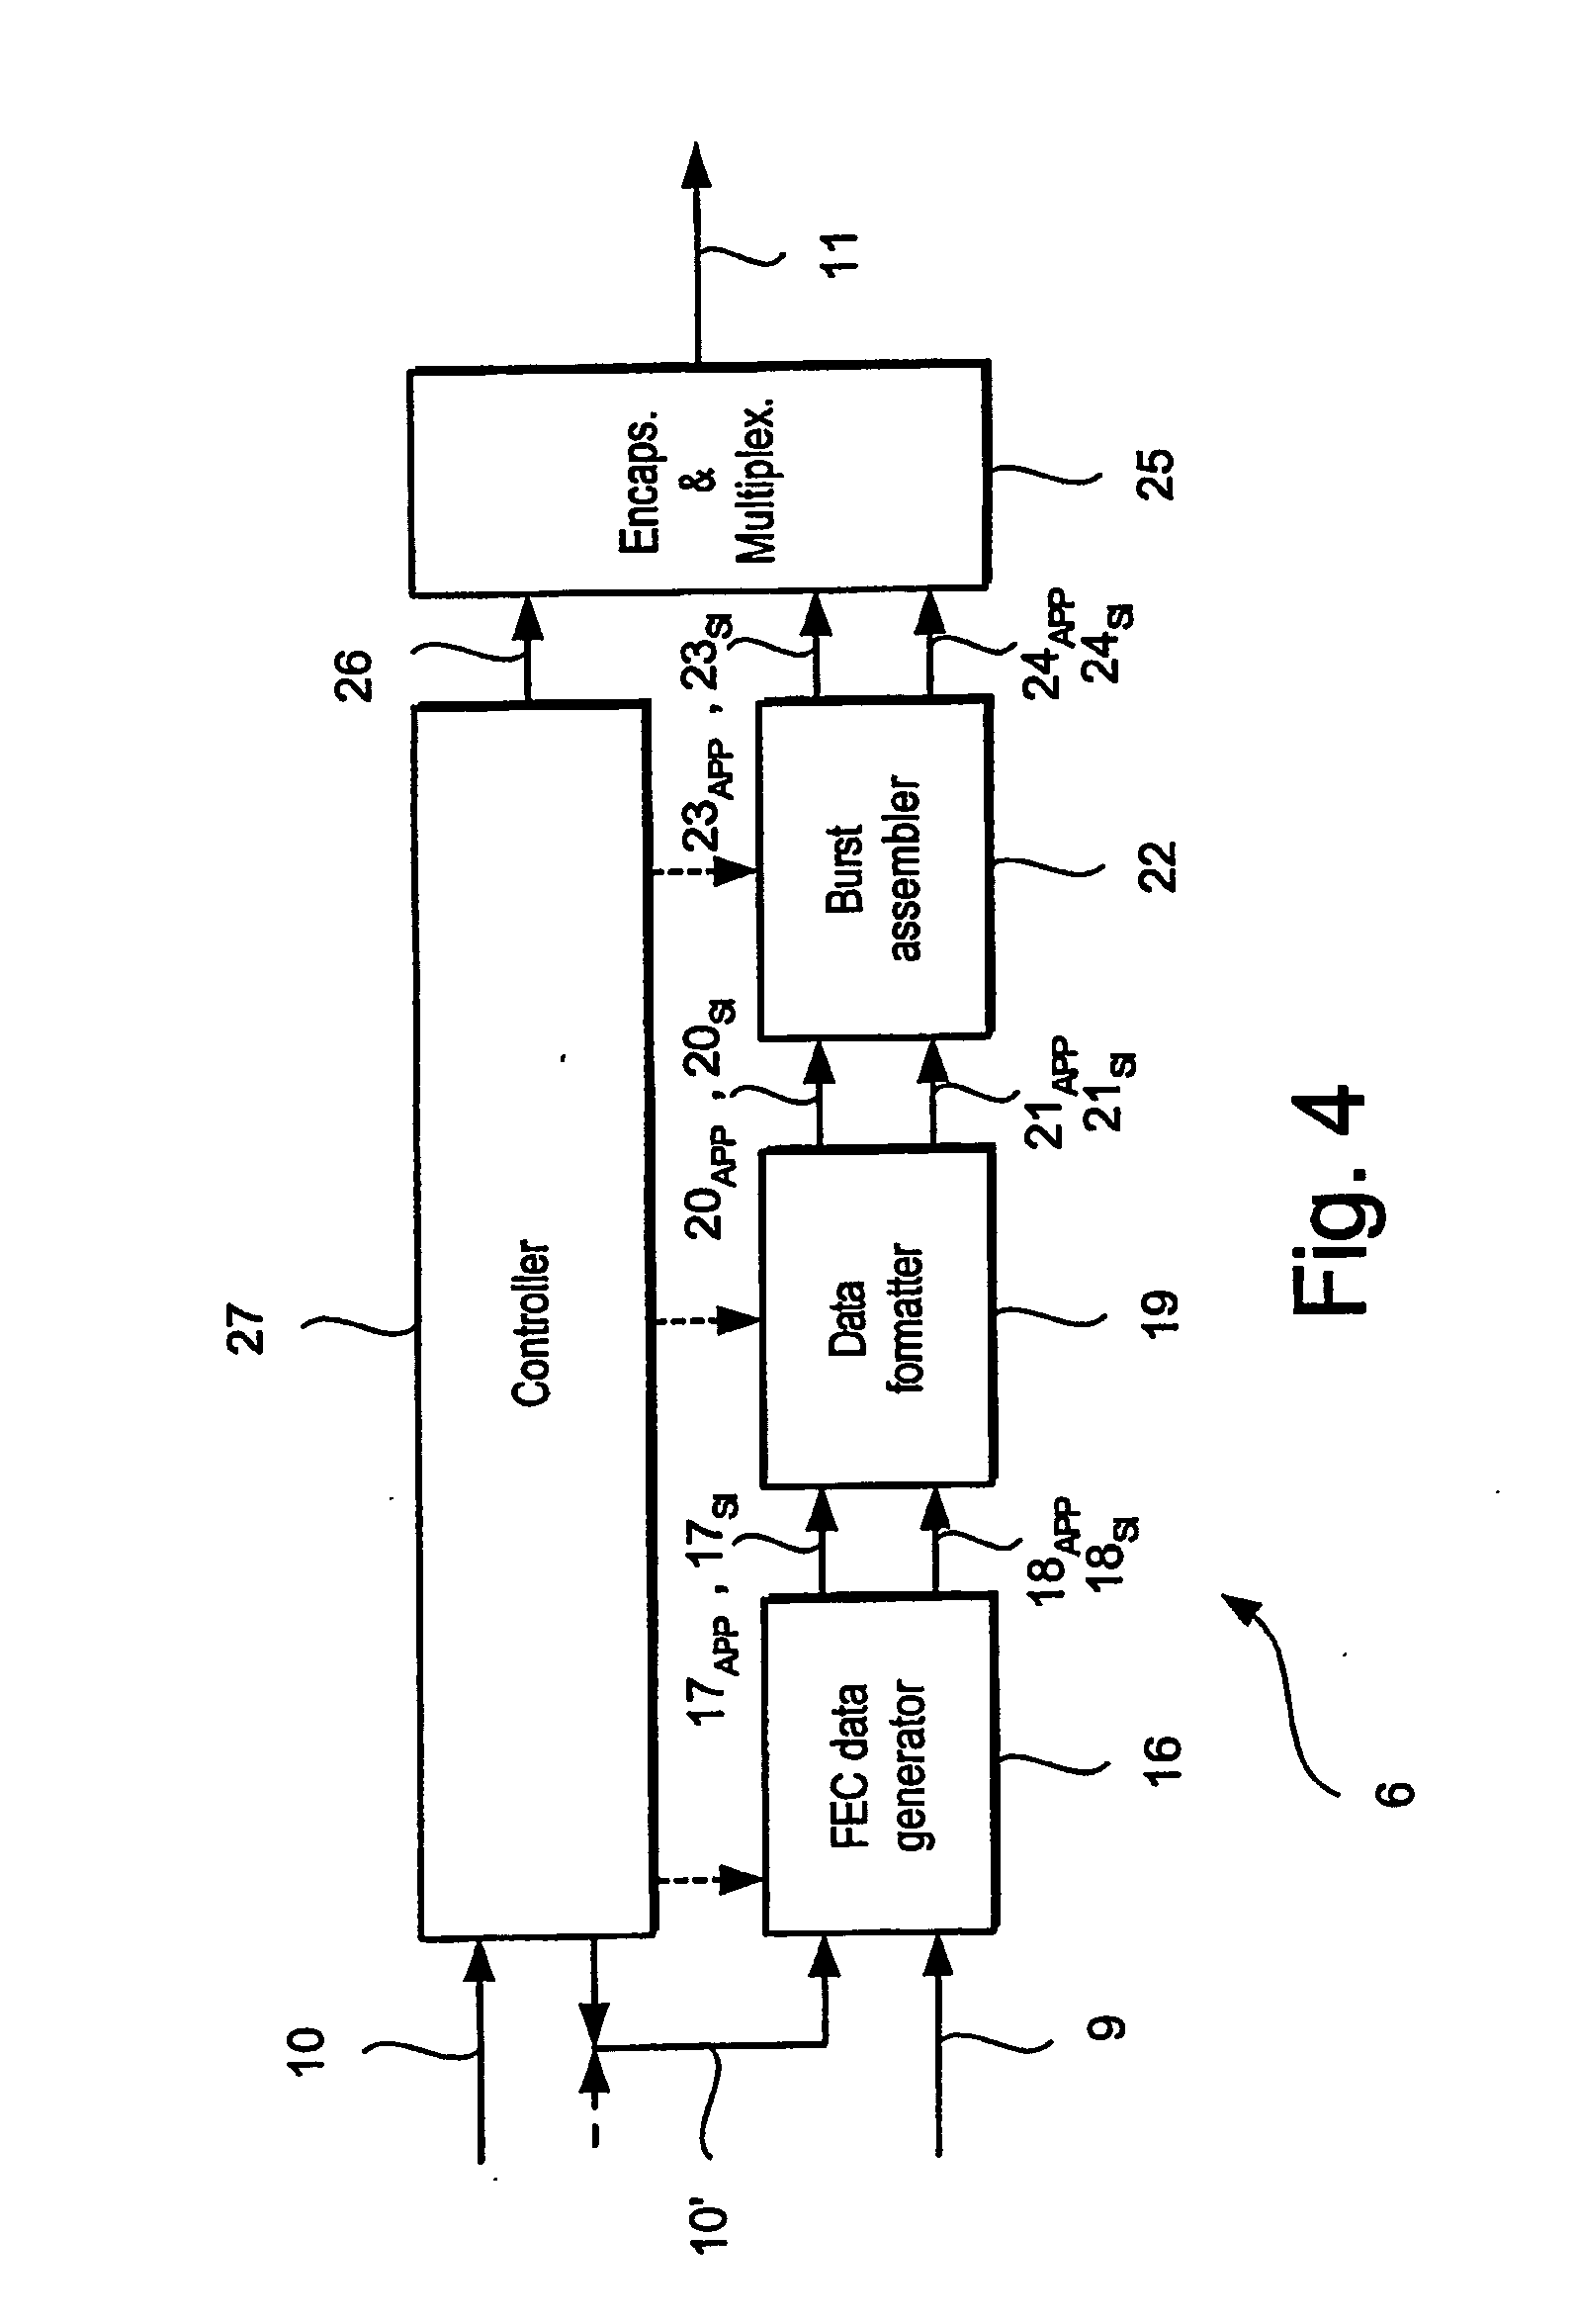 Signalling Service Information Data and Service Information Fec Data in a Communication Network